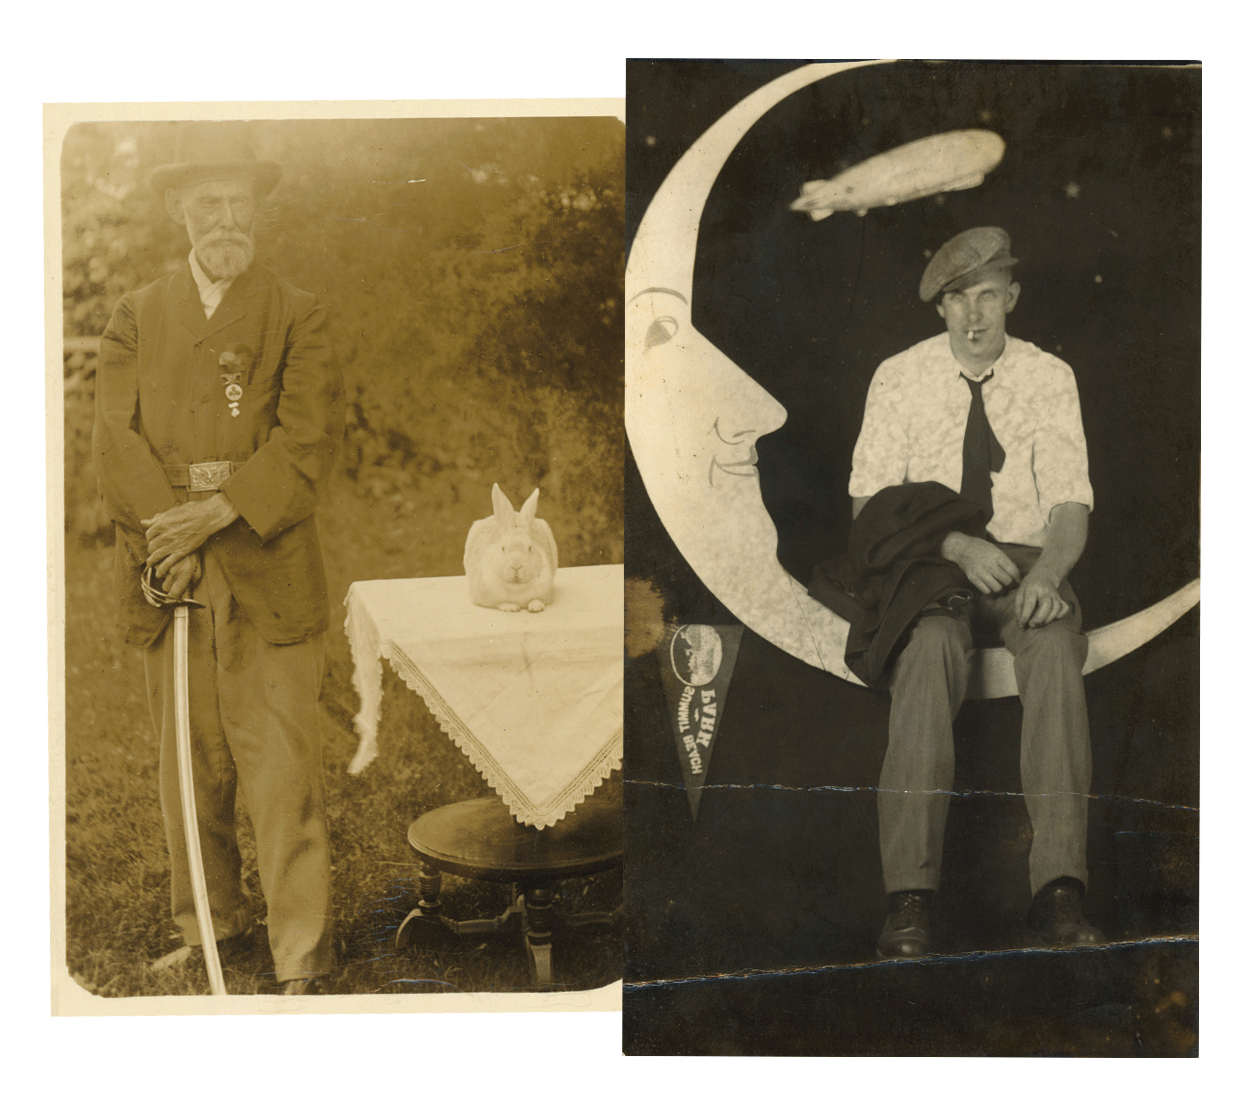 Historic postcards from the early 20th century, one of a man with rabbit, the other of a man sitting on a large crescent moon prop